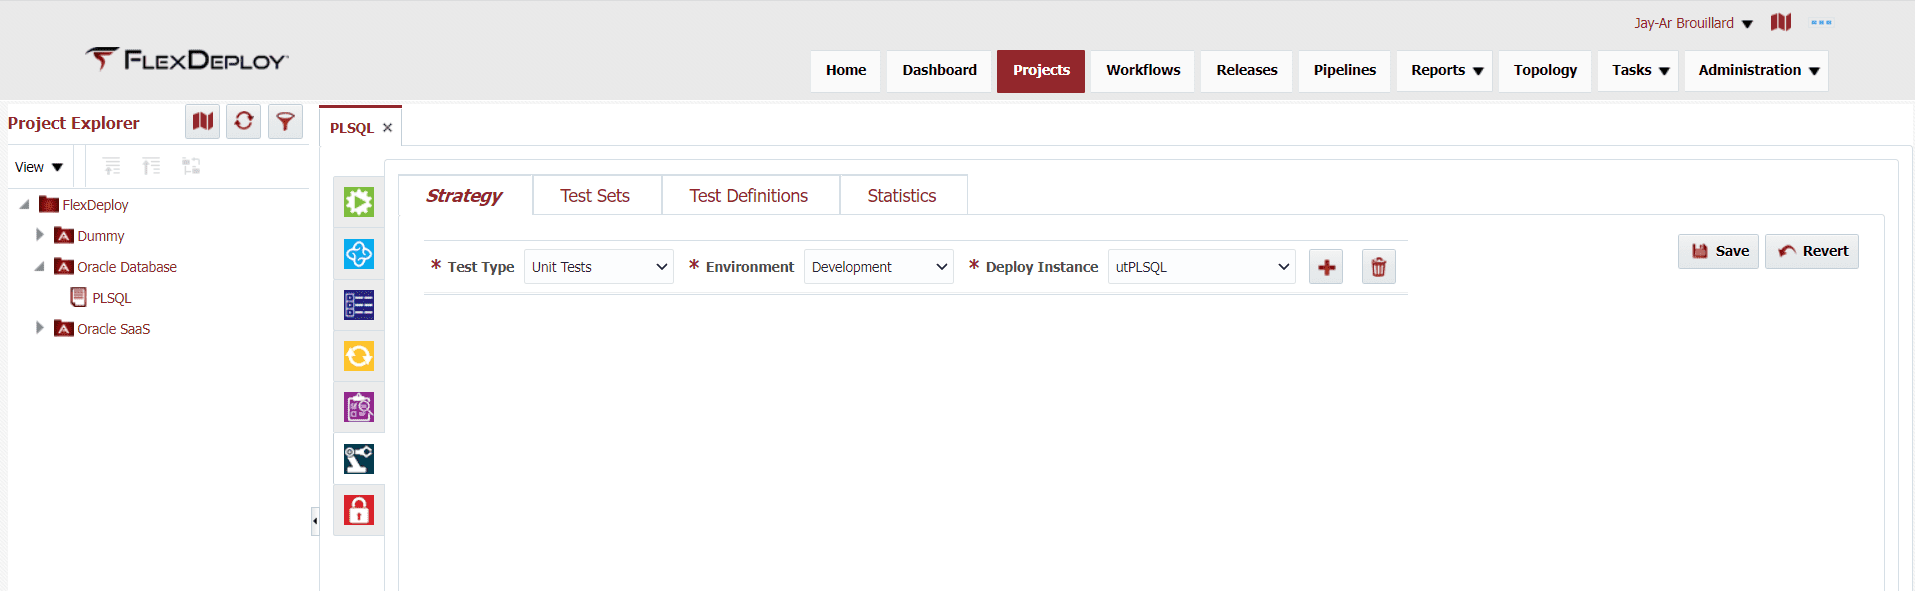 Test Automation in the Projects tab for PLSQL